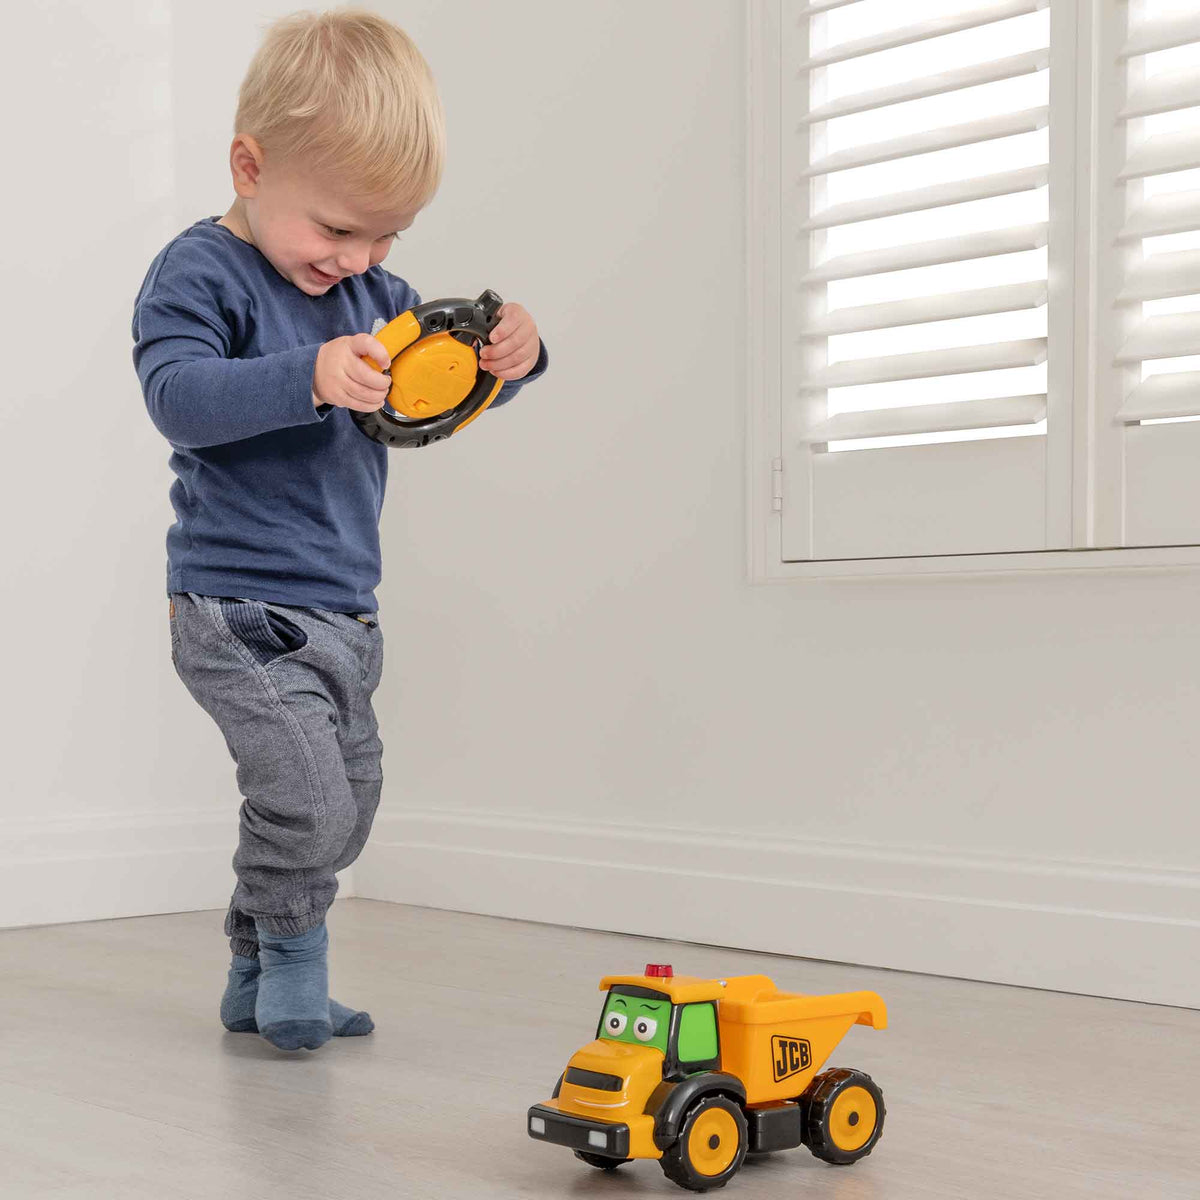 Teamsterz JCB My First Dougie Dump Truck | Remote Control Construction Toy